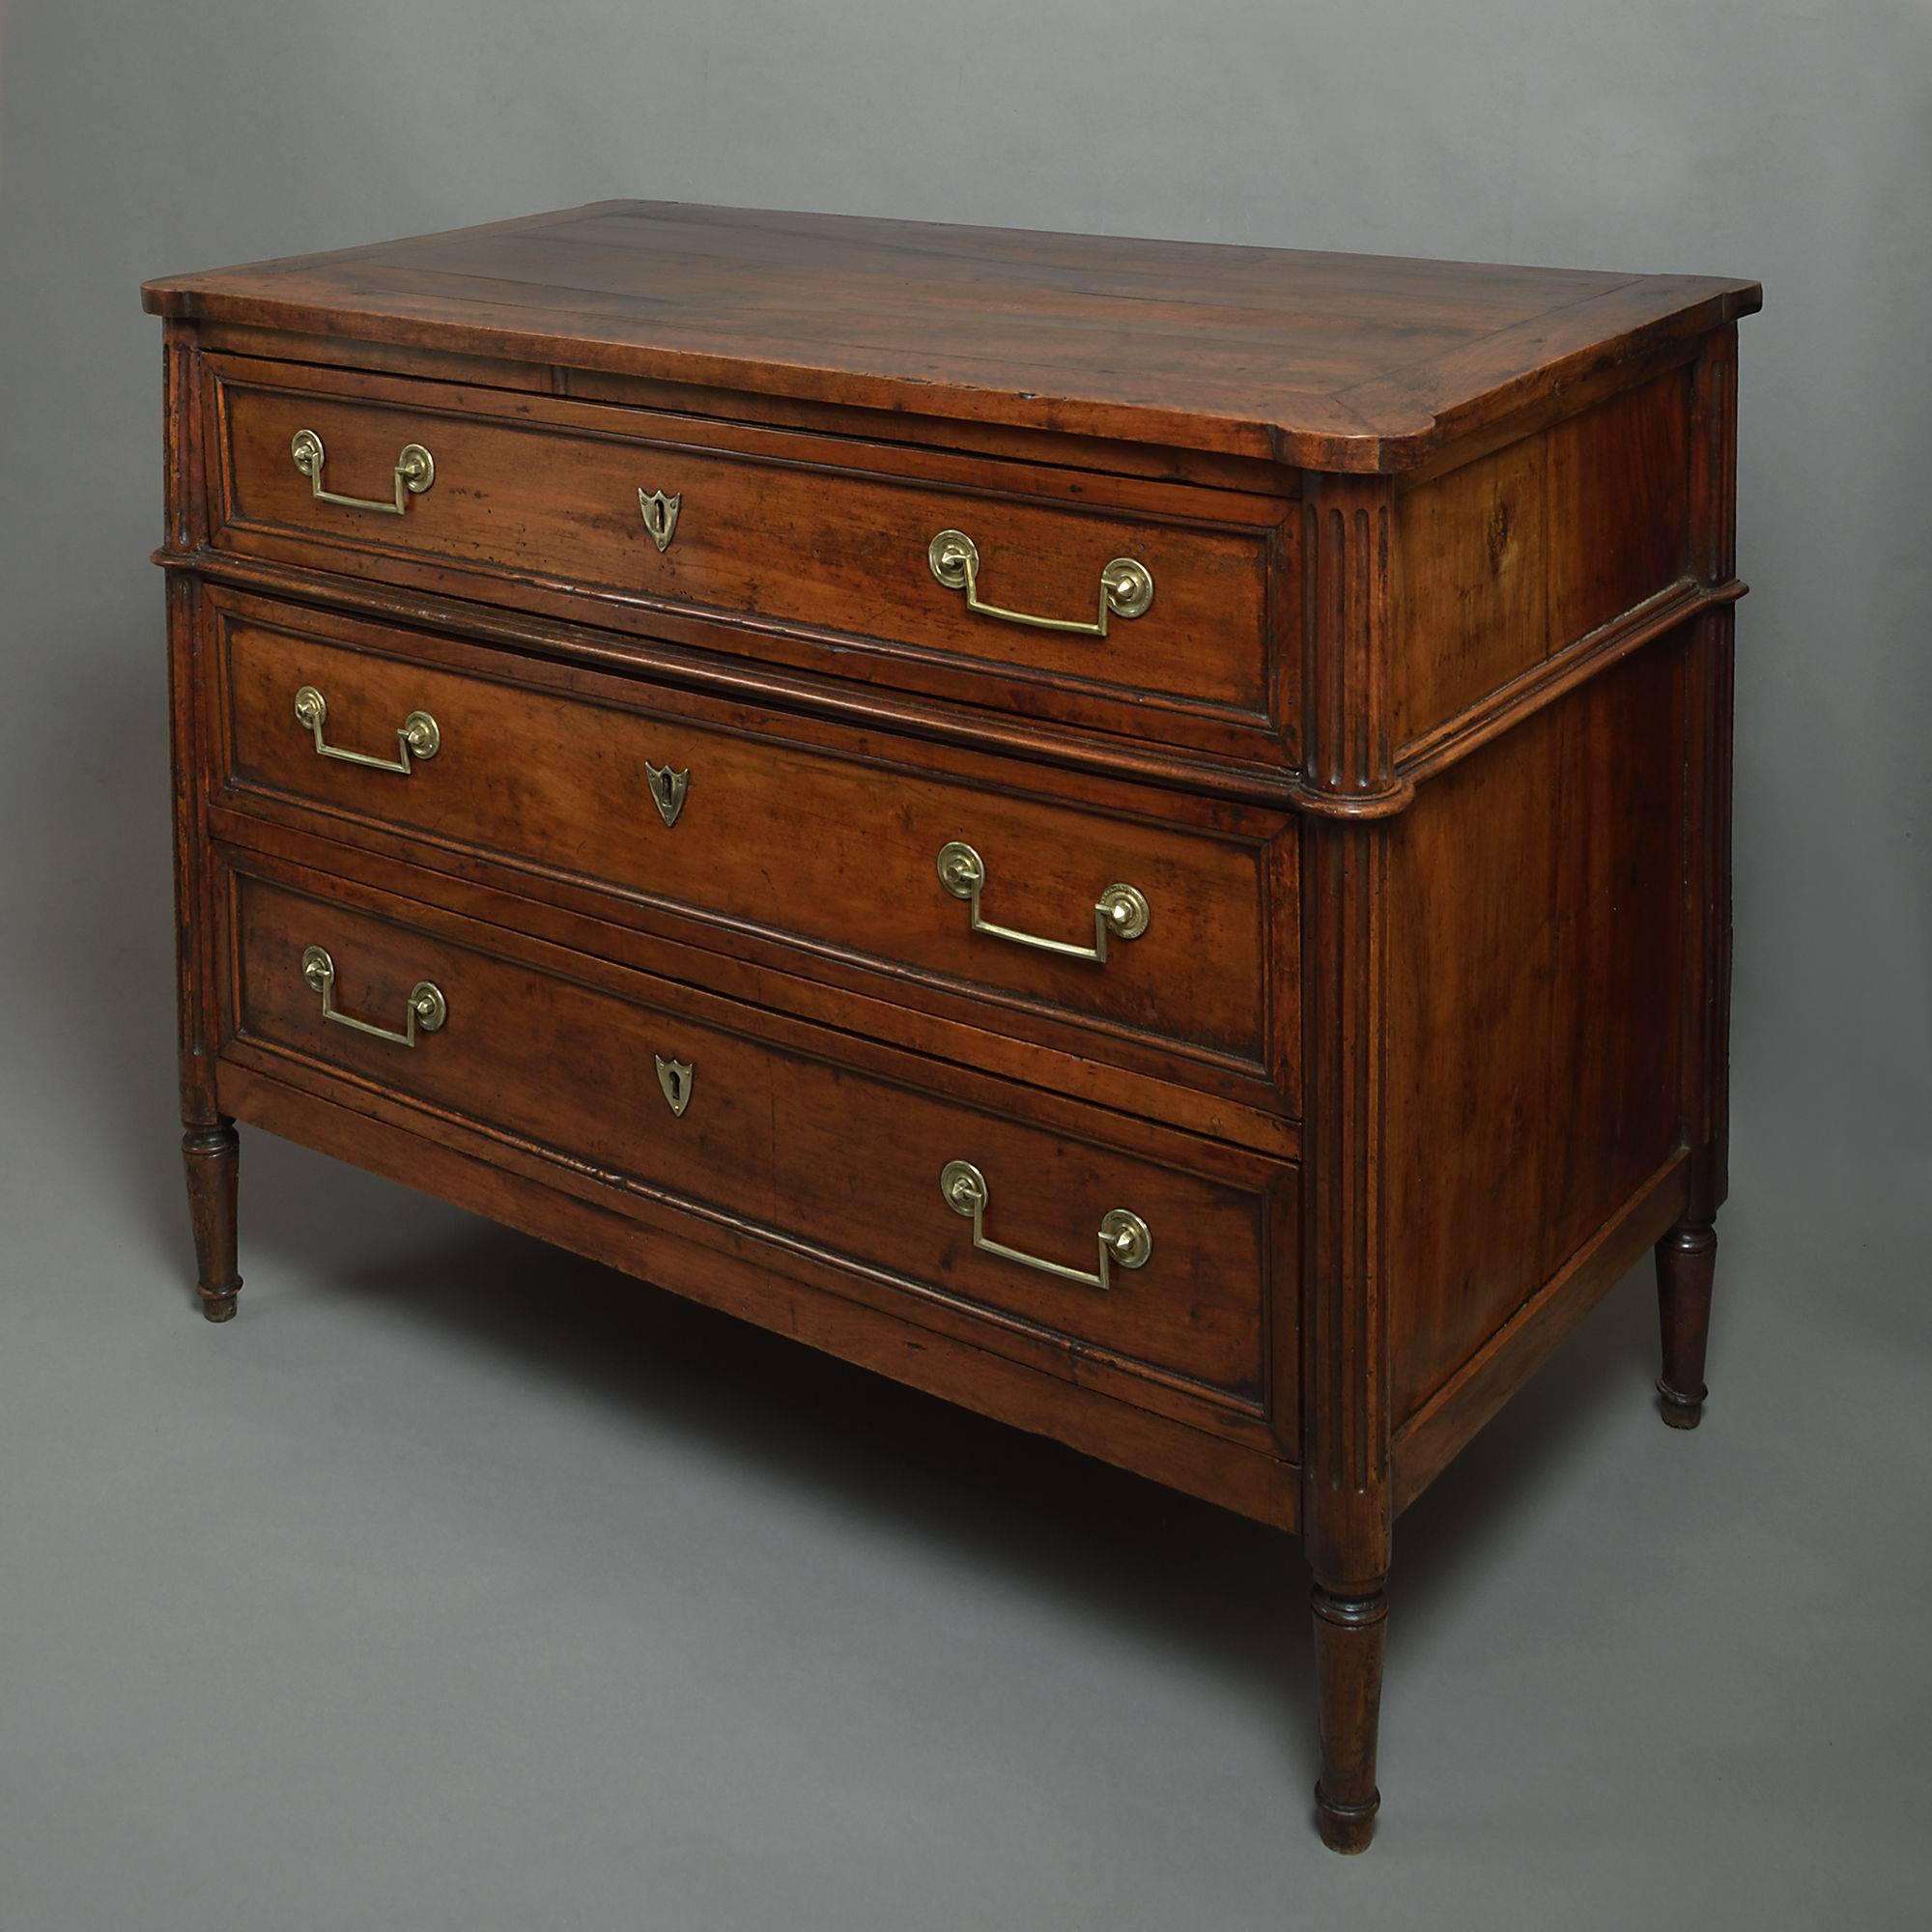 A late 18th century Louis XVI period walnut commode, having a cleated top above three drawers with rectangular brass handles and shield lock escutcheons, between fluted column ends, all raised on turned legs.